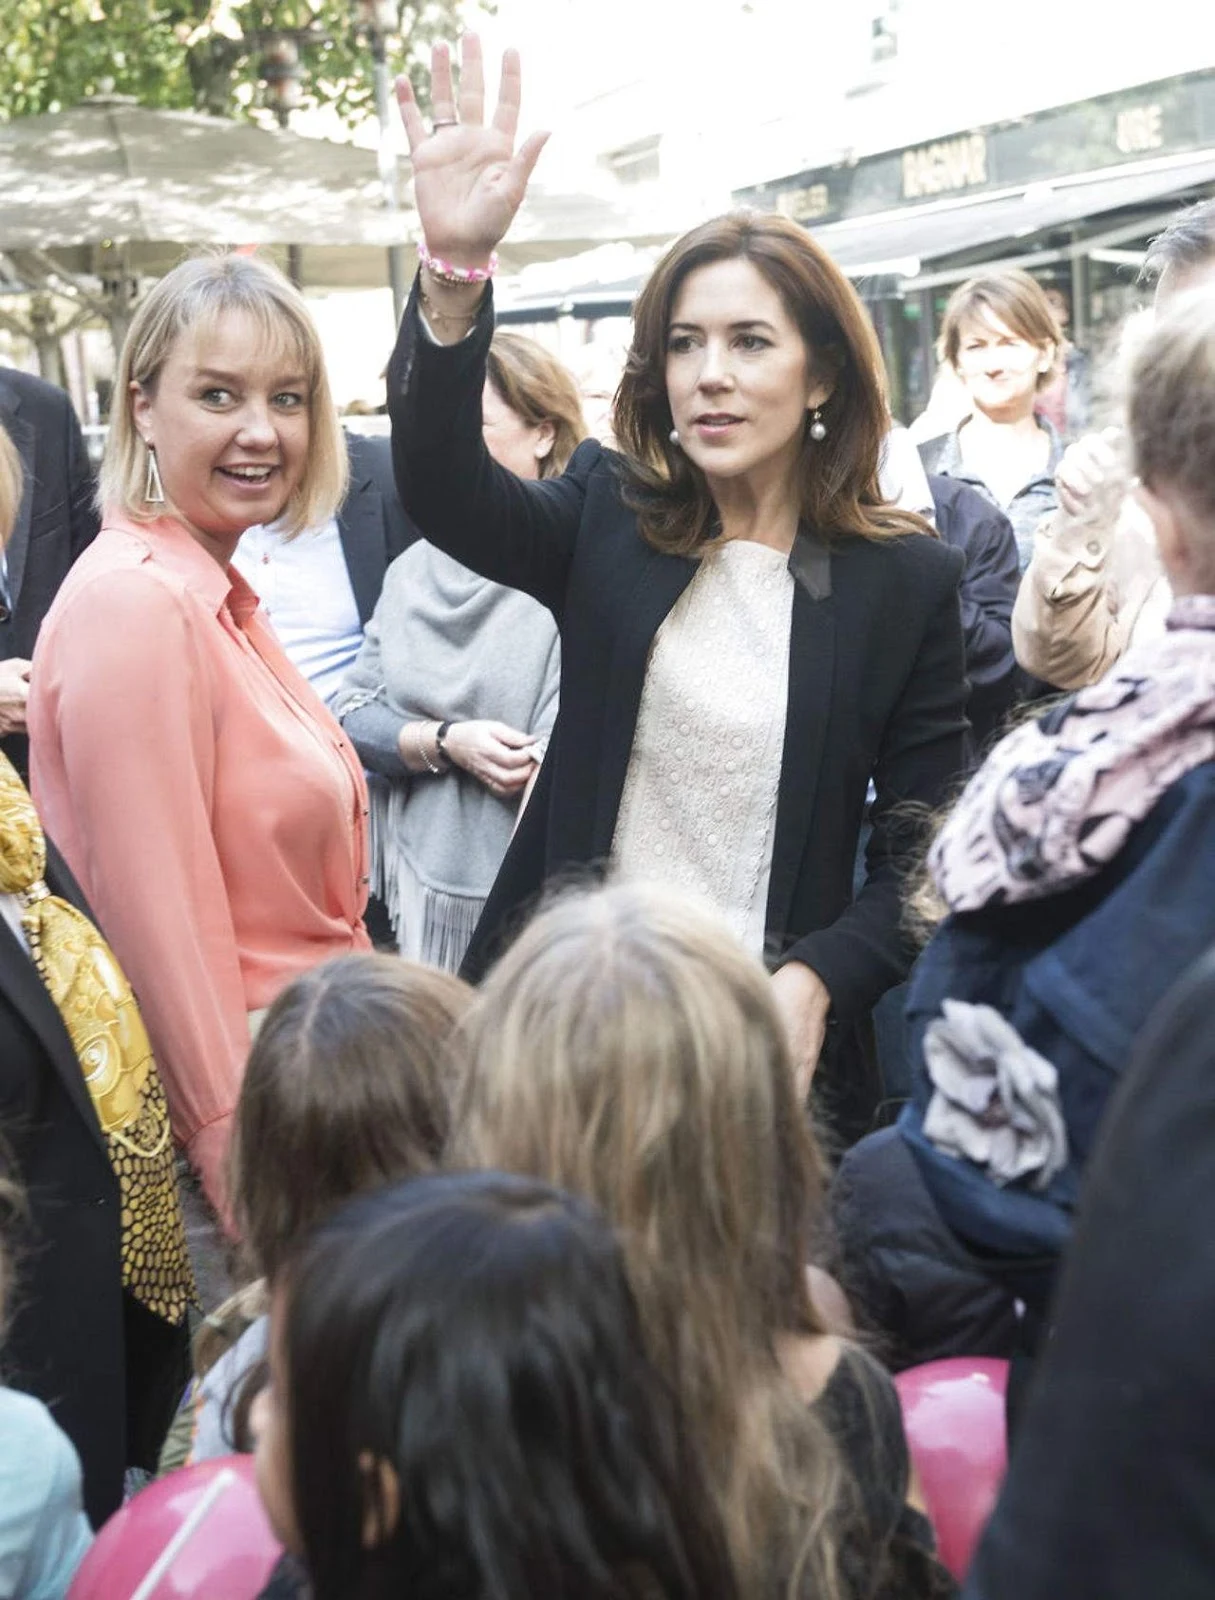 HRH Crown Princess Mary will open the conference together with Mayor of Culture and Urban Development Jane Jegind, Principal of University of Southern Denmark Henrik Dam, and Dr. Jan van Gils, President of the European Network for Child Friendly Cities, on: